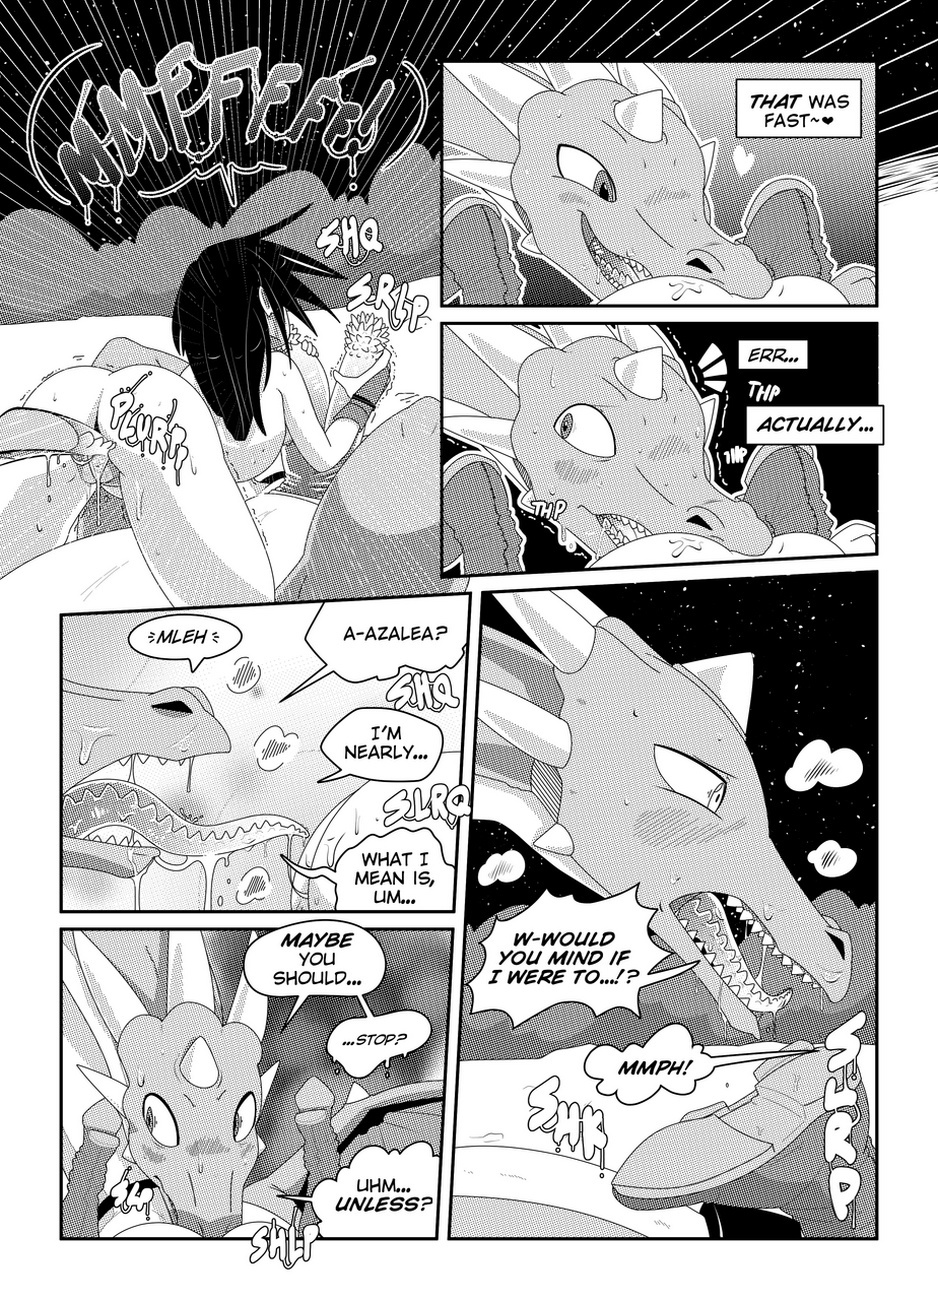 Night Of The Dragon\'s Embrace - part 2